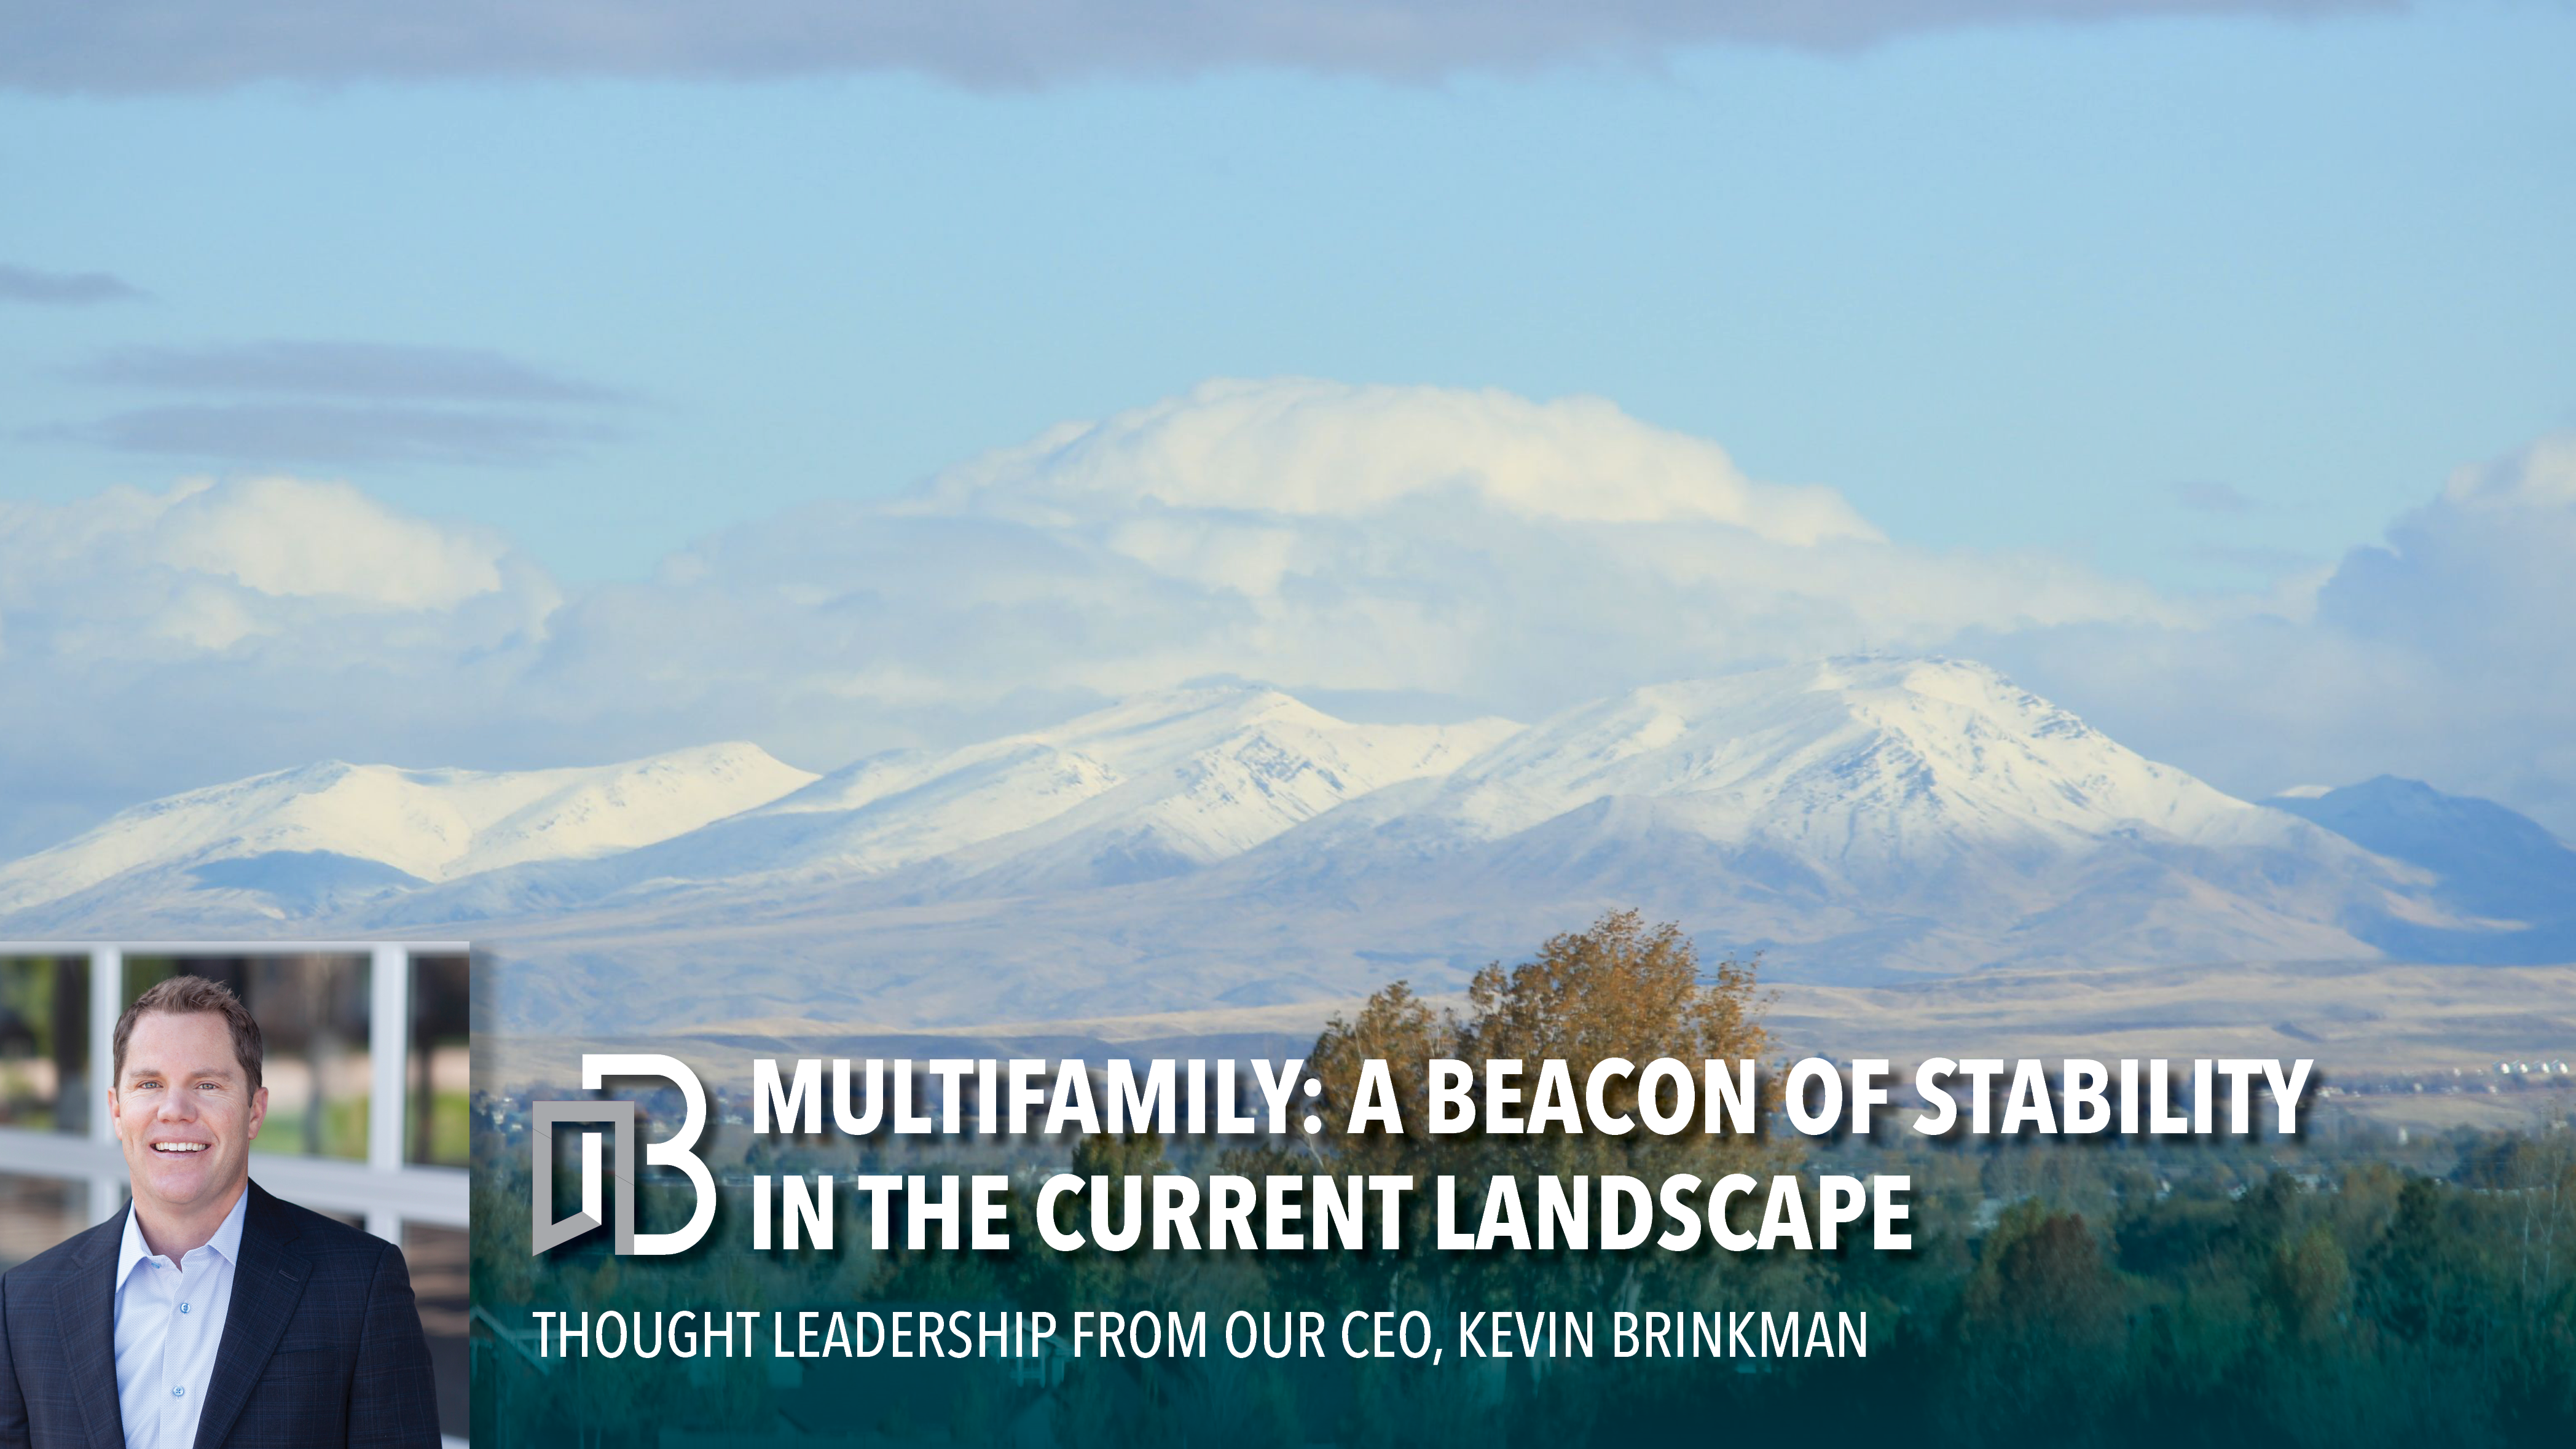 Kevin Thought Leadership - Multifamily Investment